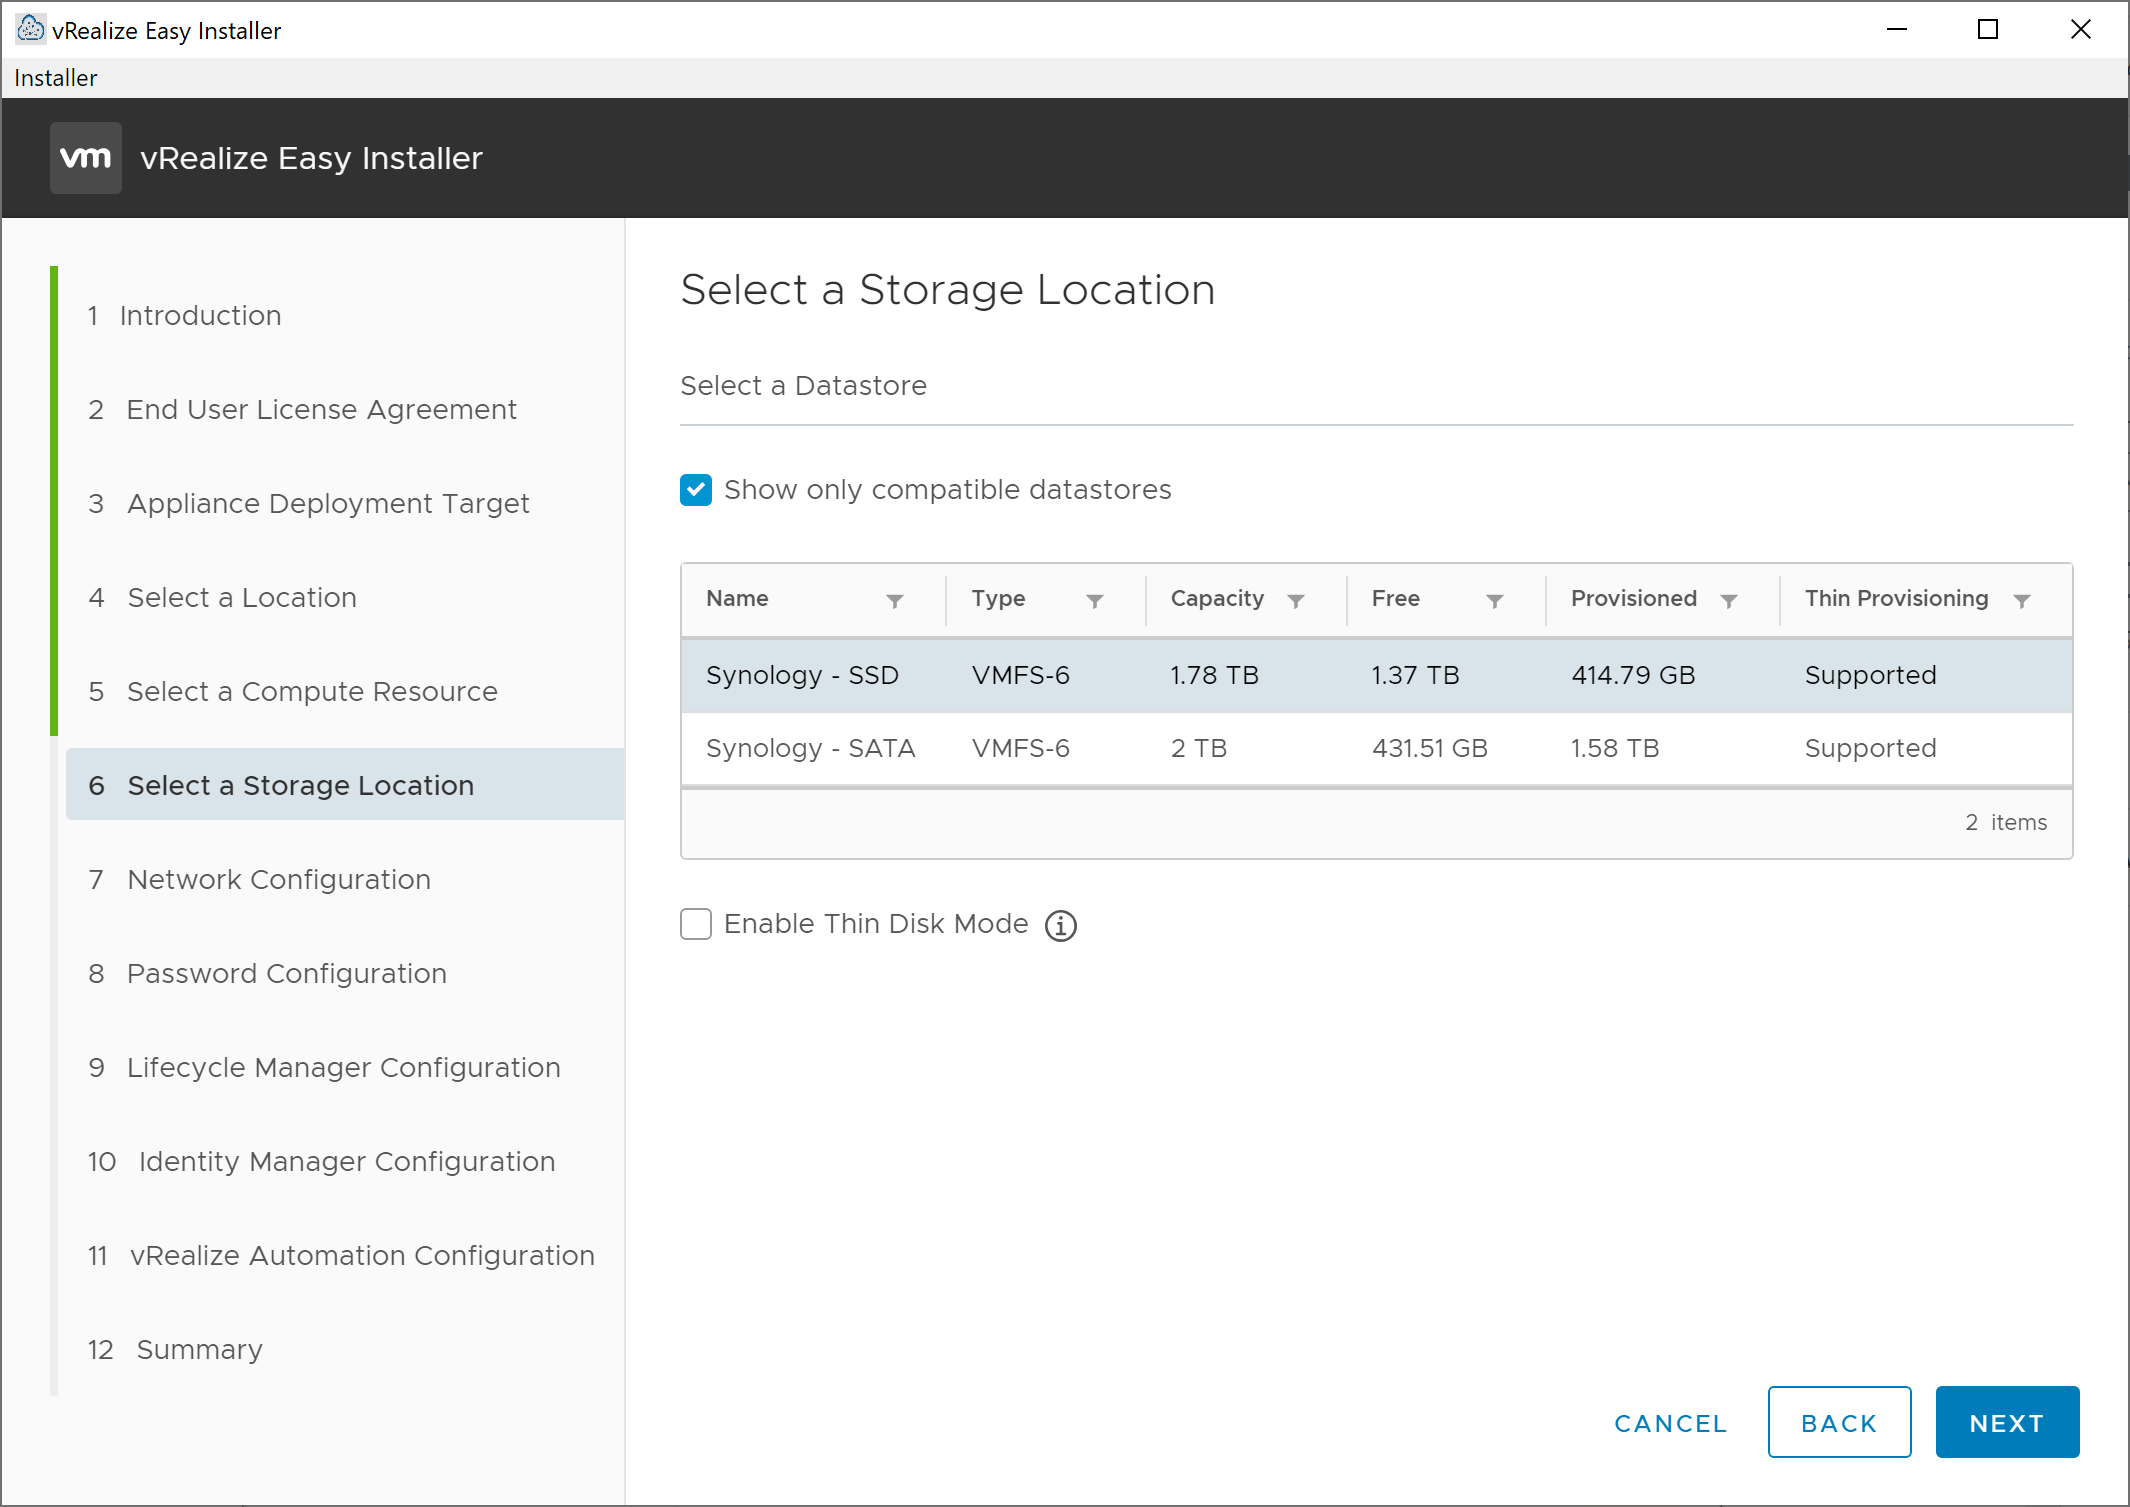 vRealize Easy Installer - New Install - Select a Storage Location